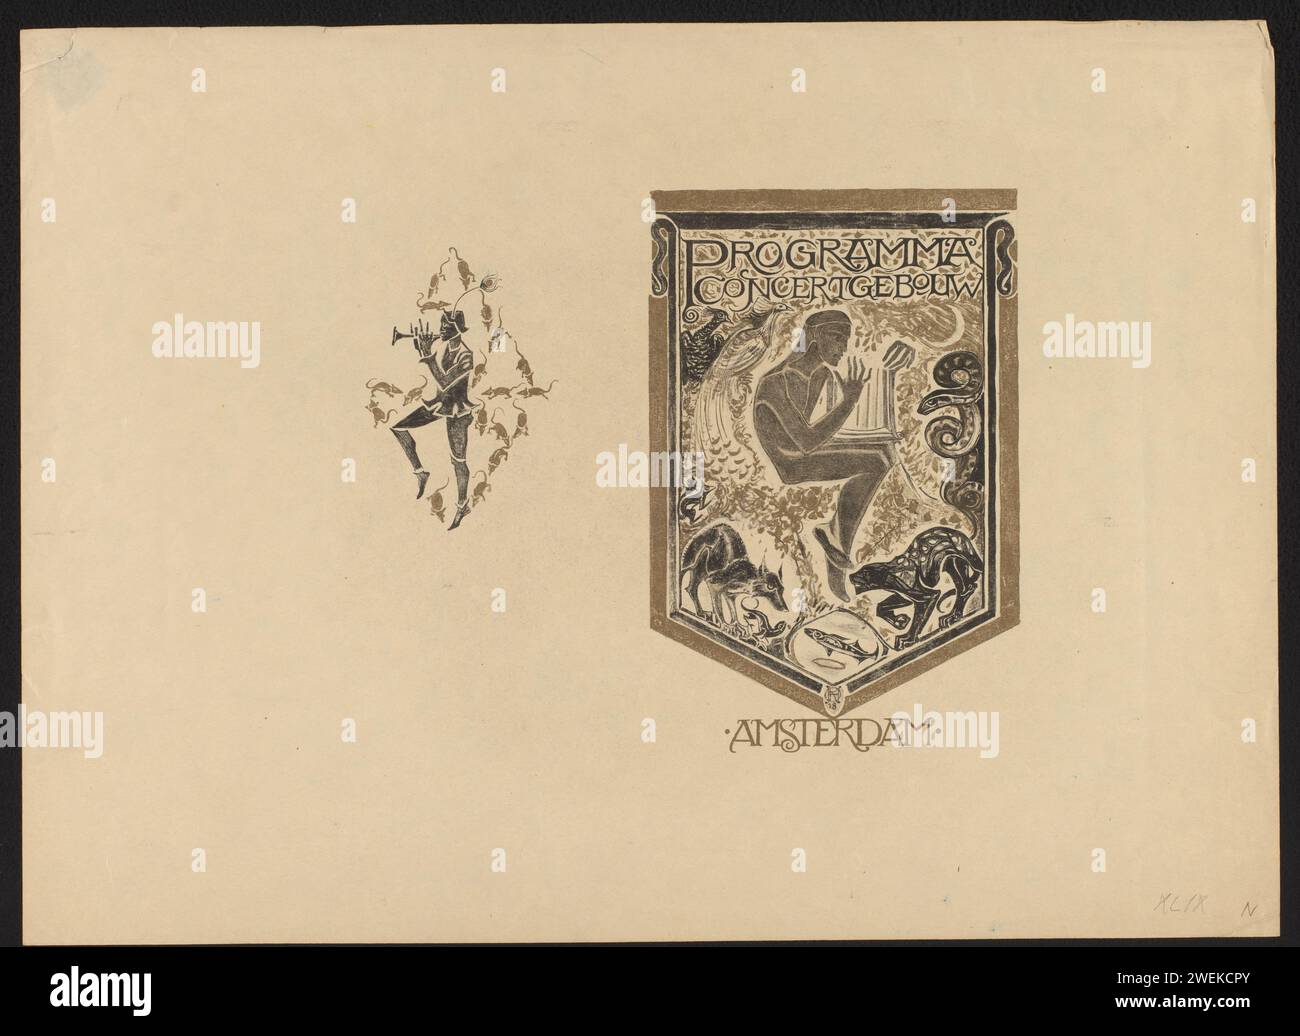 Cover design for: Program Concertgebouw Amsterdam, Richard Nicolaüs Roland Holst, 1918 print On the left the rat catcher of Hamelen who plays his flute. The rats that he thus attracts are placed in a diamond shape around him. On the right Orpheus who plays on his harp in the company of different animals.  paper  rat exterminator. musician. tales and fairy tales. Orpheus playing the lyre: trees and rocks move, beasts and birds are enchanted. animals Stock Photo